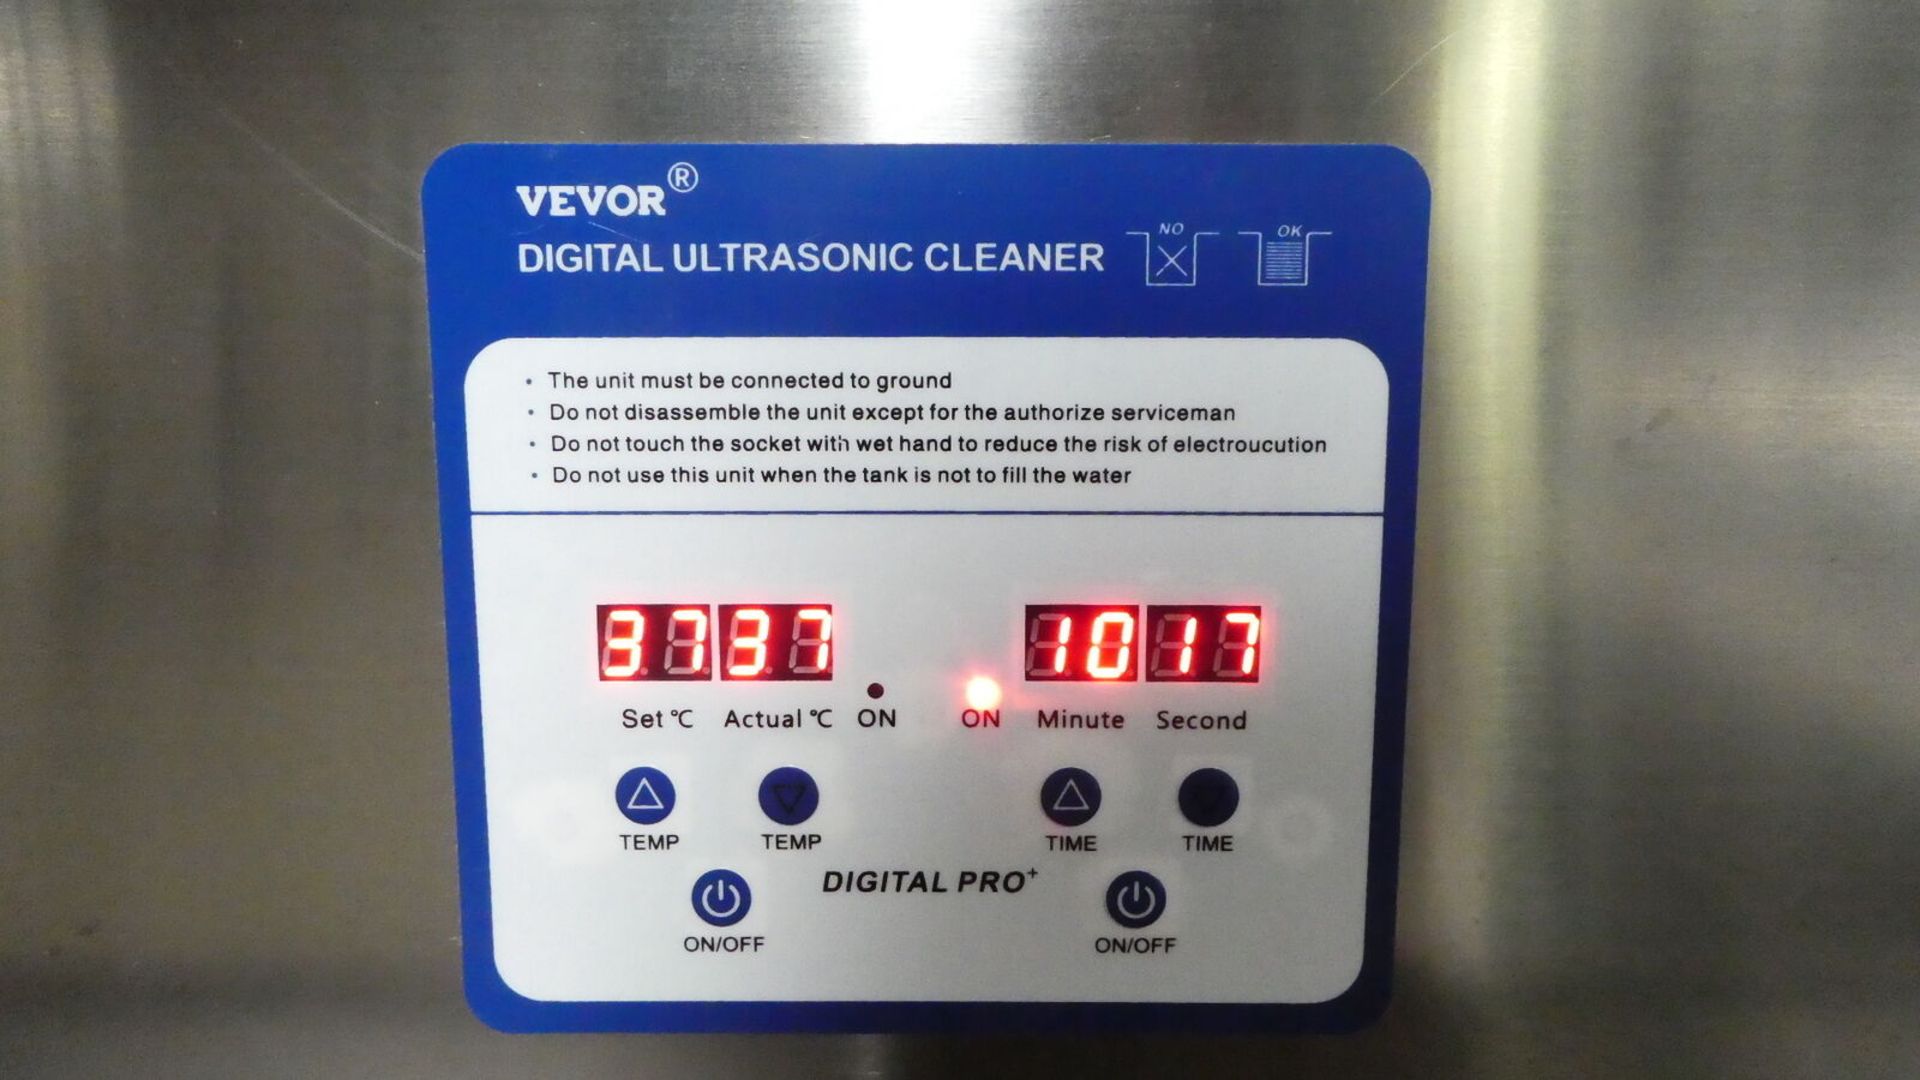 VEVOR Digital Ultrasonic Cleaner TH-100A LS Capacity 30.0L - Gilroy - Image 2 of 9